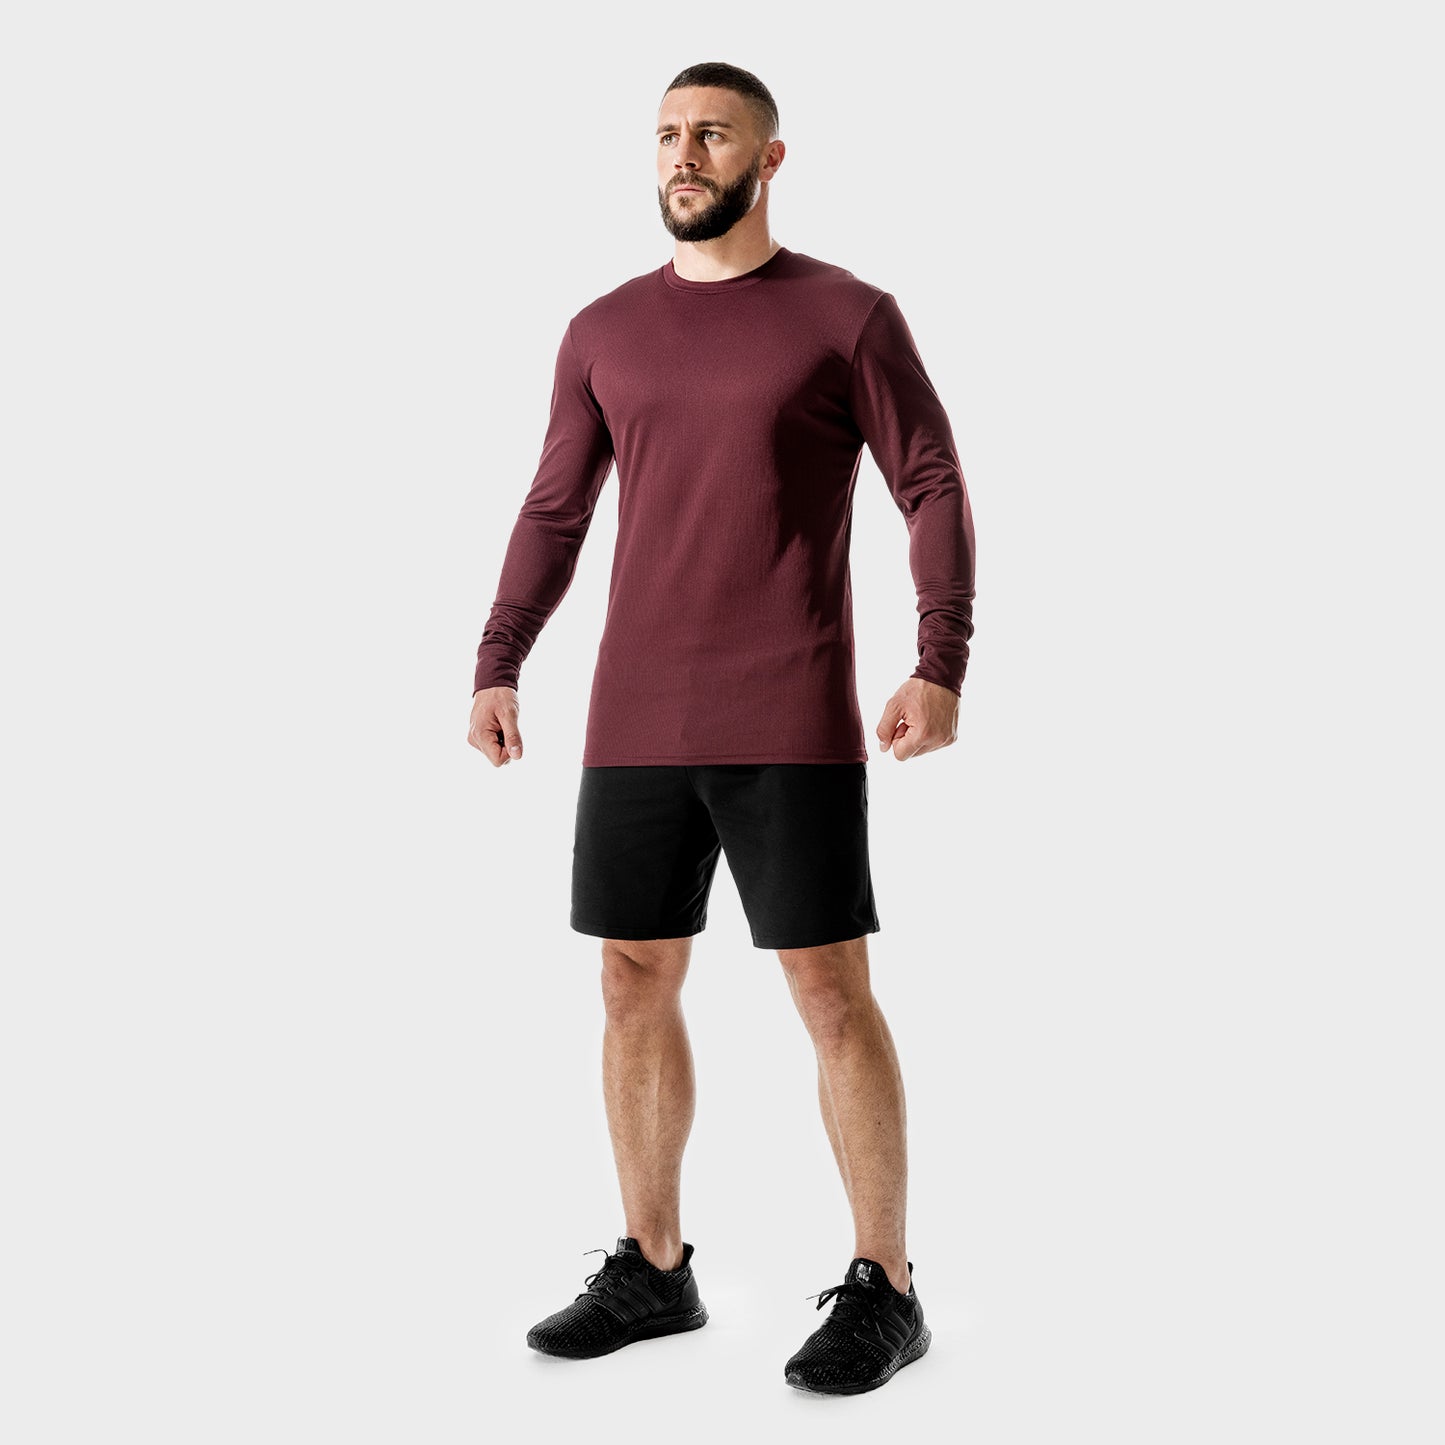 squatwolf-gym-wear-lab360-performance-crew-top-maroon-running-tops-for-men